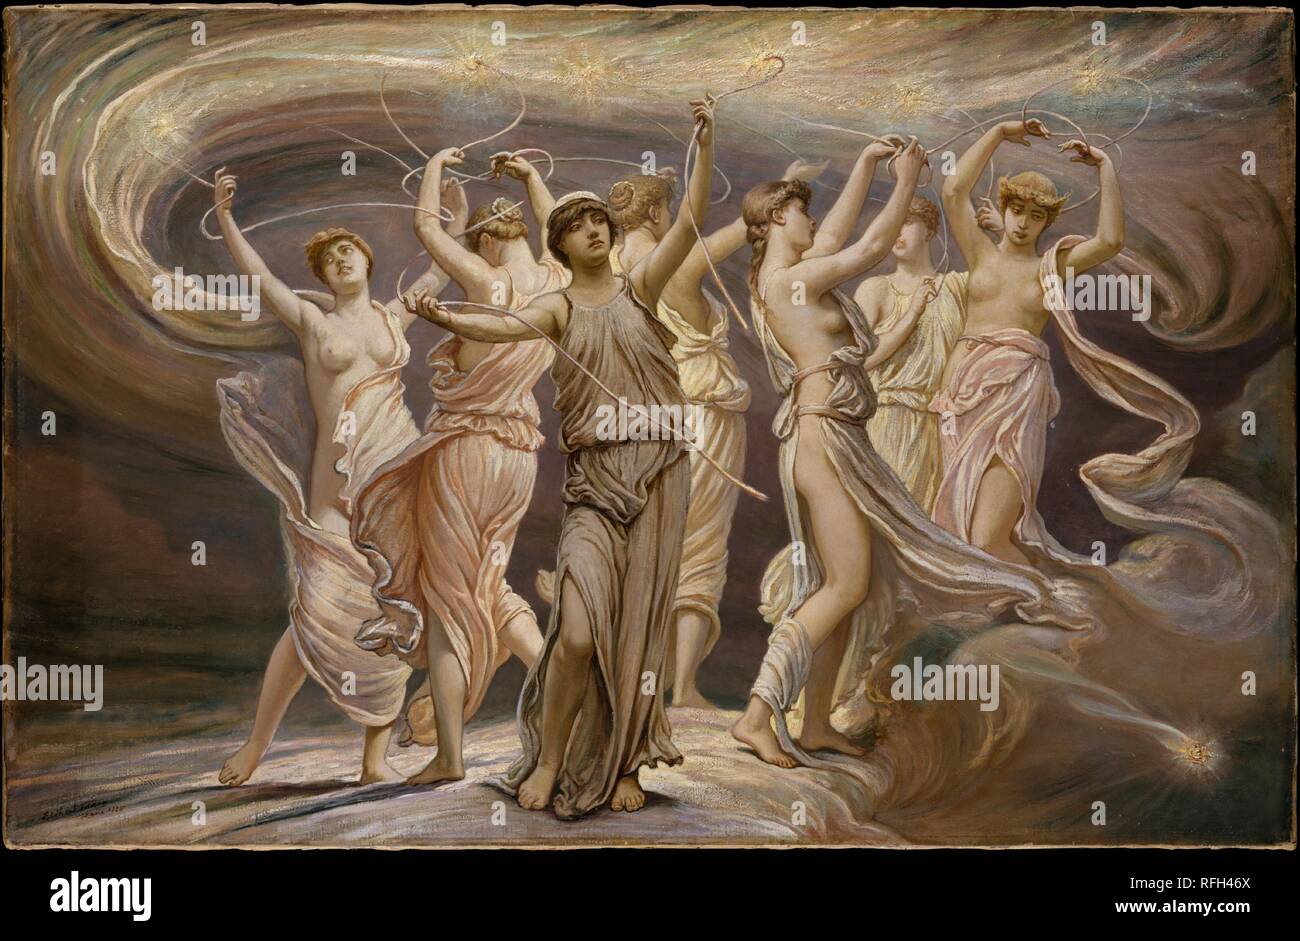 The Pleiades. Artist: Elihu Vedder (American, New York 1836-1923 Rome). Dimensions: 24 1/8 x 37 5/8 in. (61.3 x 95.6 cm). Date: 1885.  According to Greek mythology, the Pleiades were the seven daughters of Atlas and the nymph Pleione. Vedder used the Pleiades as his subject for the first illustration in the 'Rubaiyat of Omar Khayyam'. The seven female figures represent the horoscope of the astronomer-poet, Omar Khayyam. The two influences of Jupiter and the Pleiades, connected by the pleasure of the vine, are symbolized by the thread that entwines them. The central figure, whose thread is brok Stock Photo